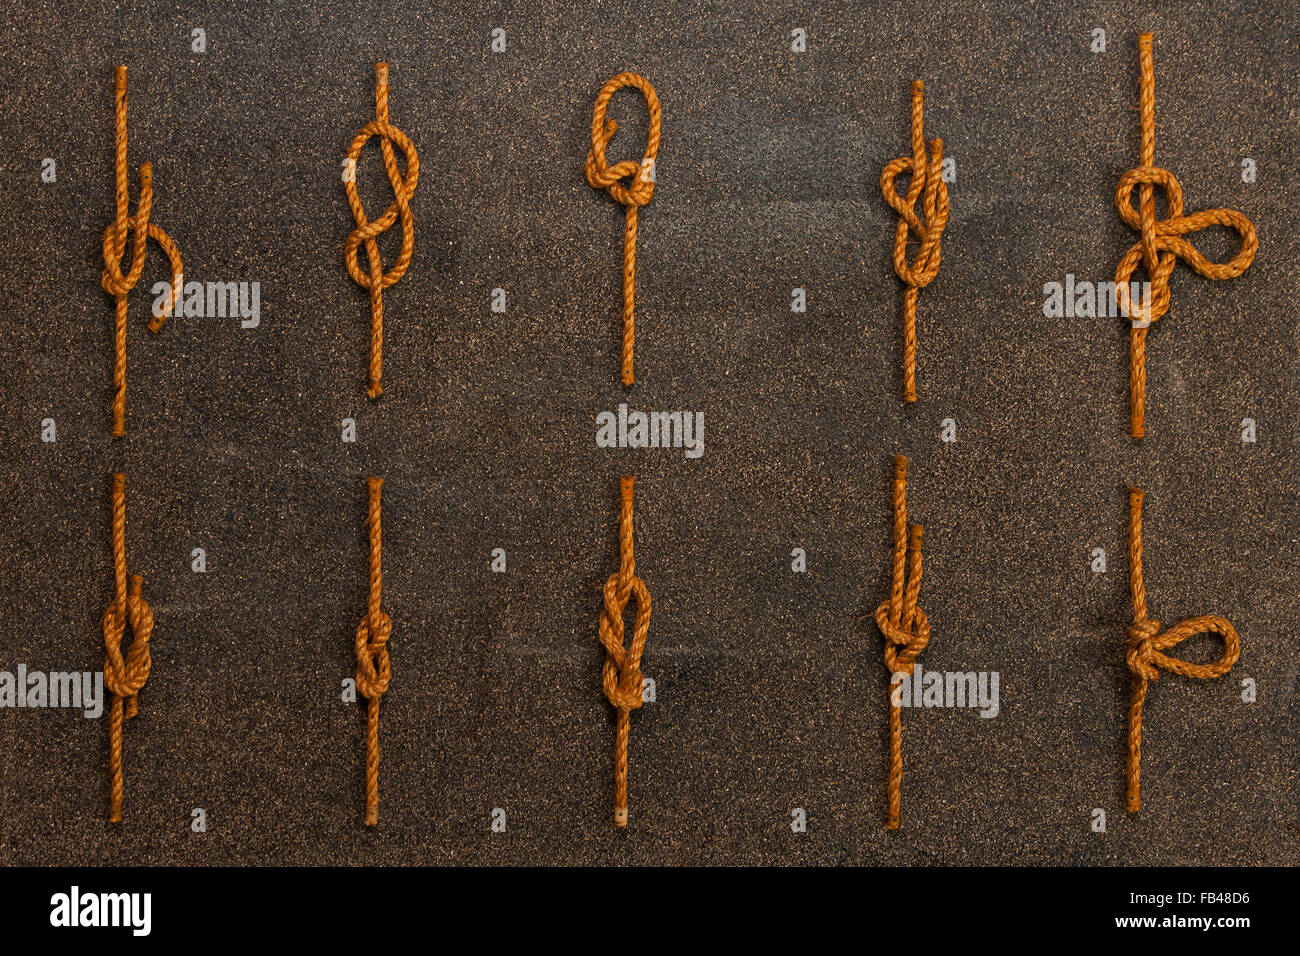 Wall of various rope tie knots Stock Photo